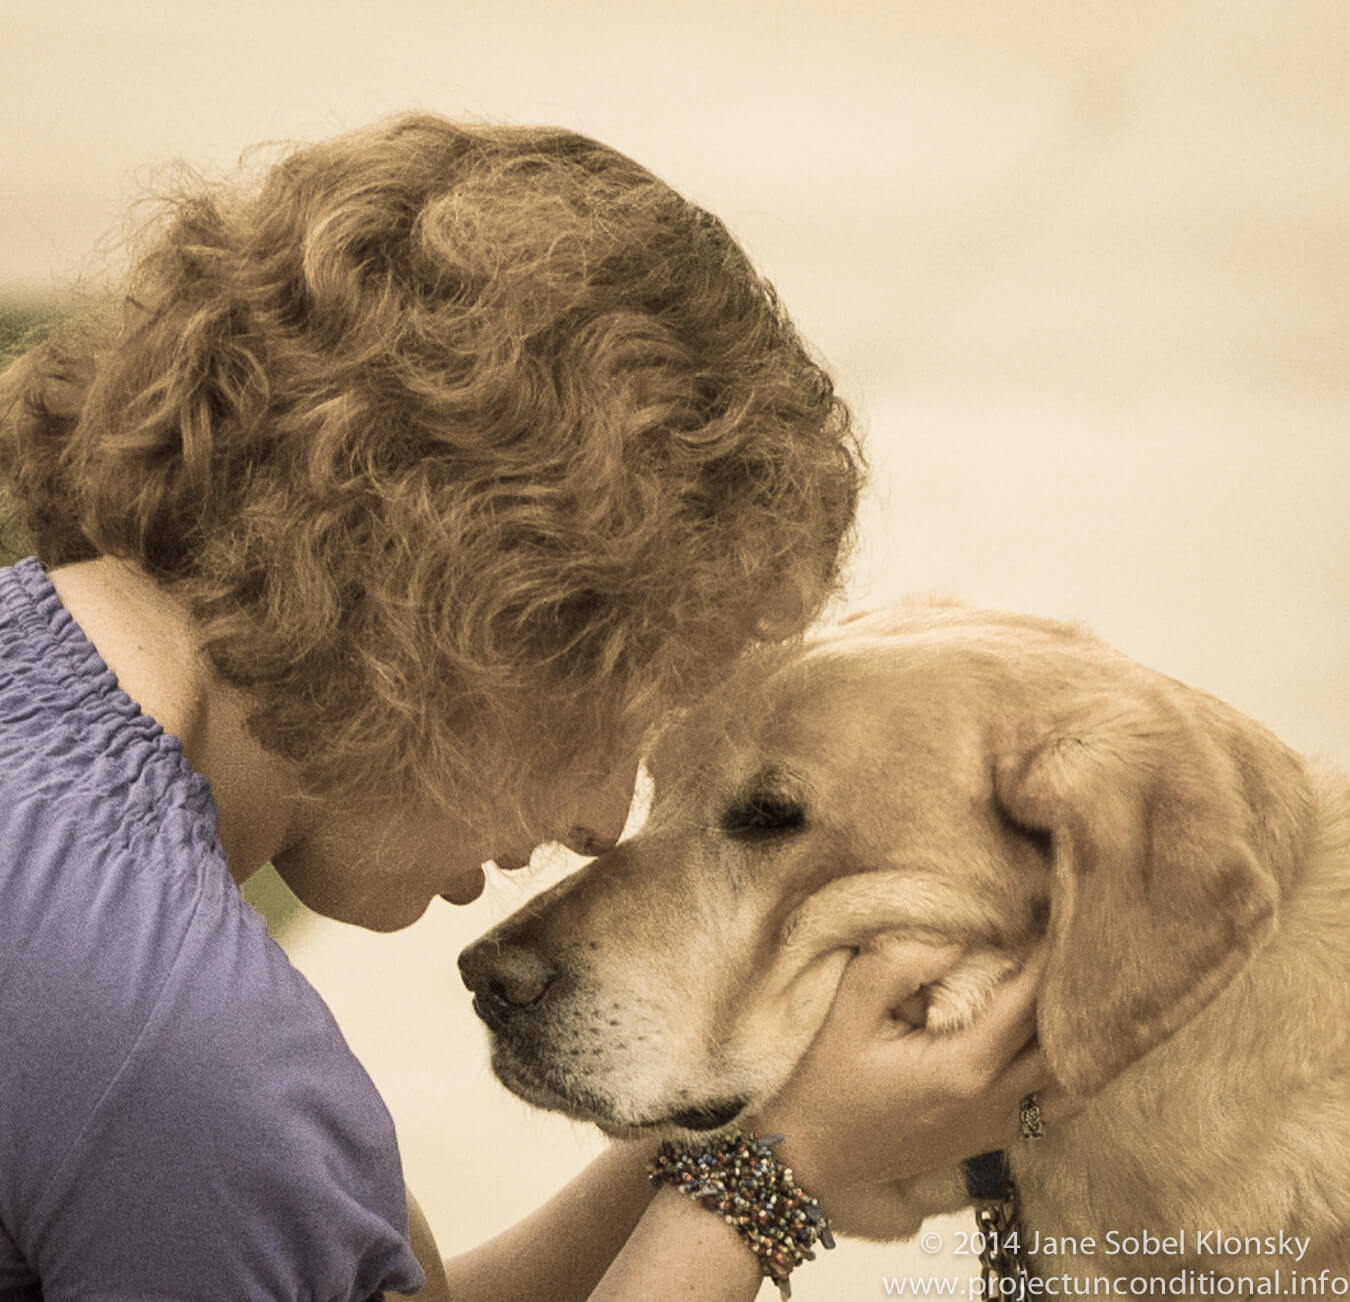 Guiding Eyes grads Kathy Nimmer and Elias by Jane Sobel Klonsky for Project Unconditional